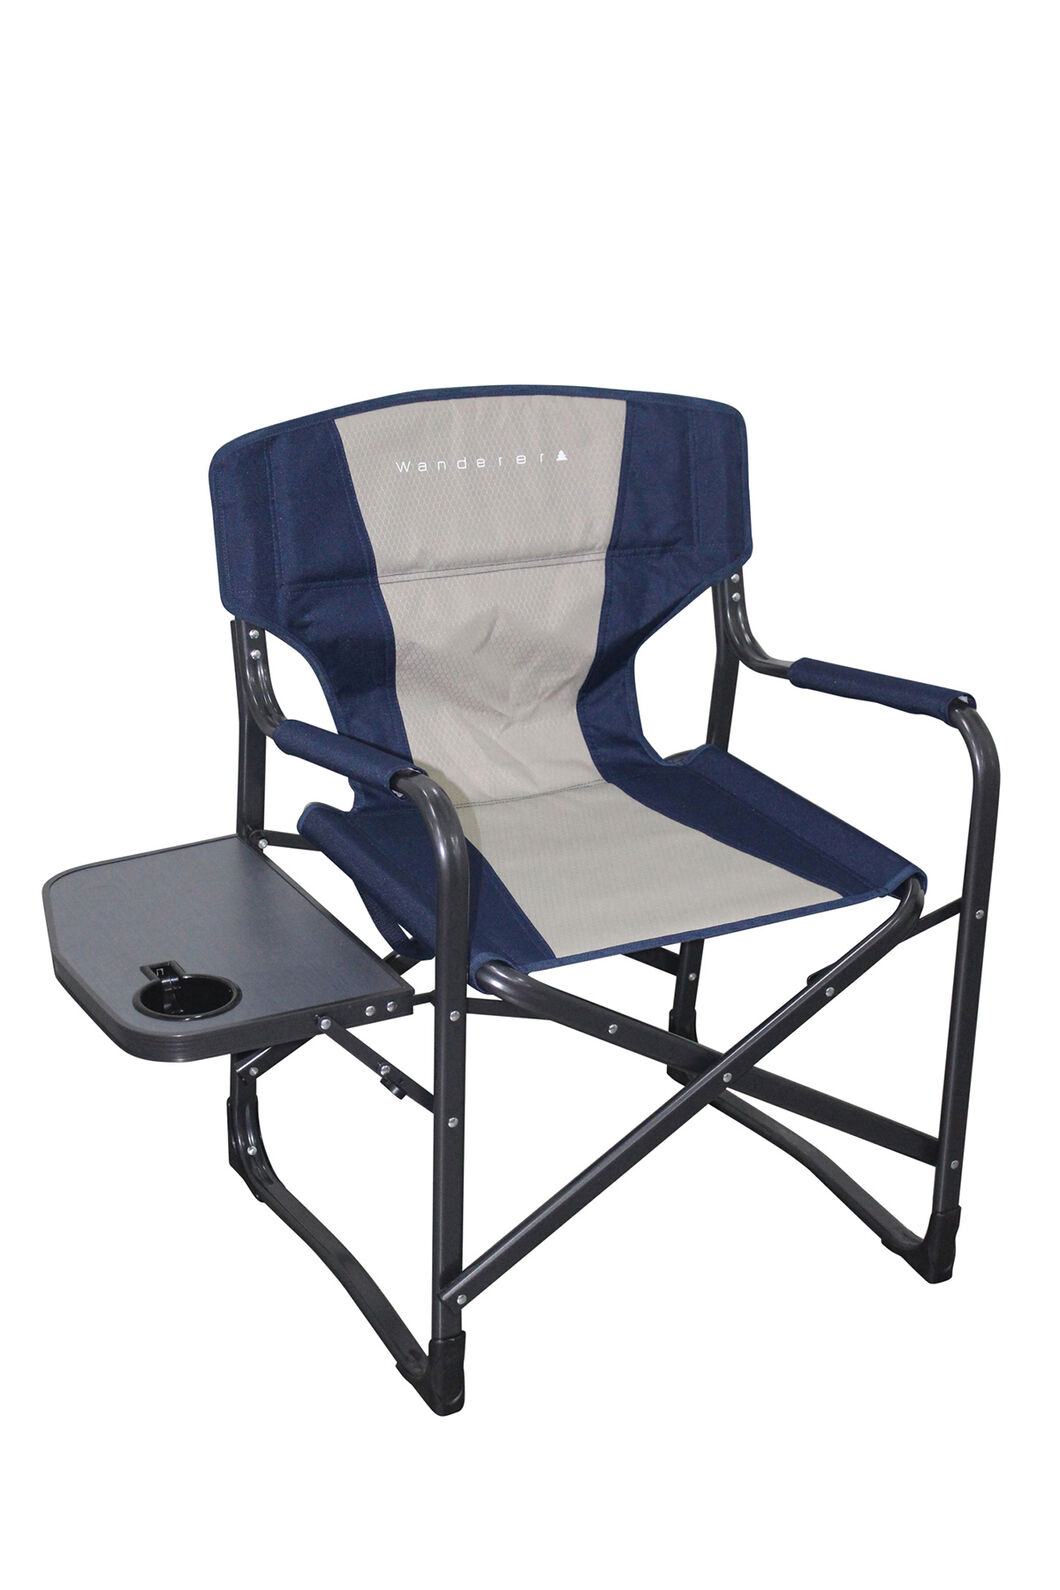 Wanderer Directors Chair With Side Table Macpac